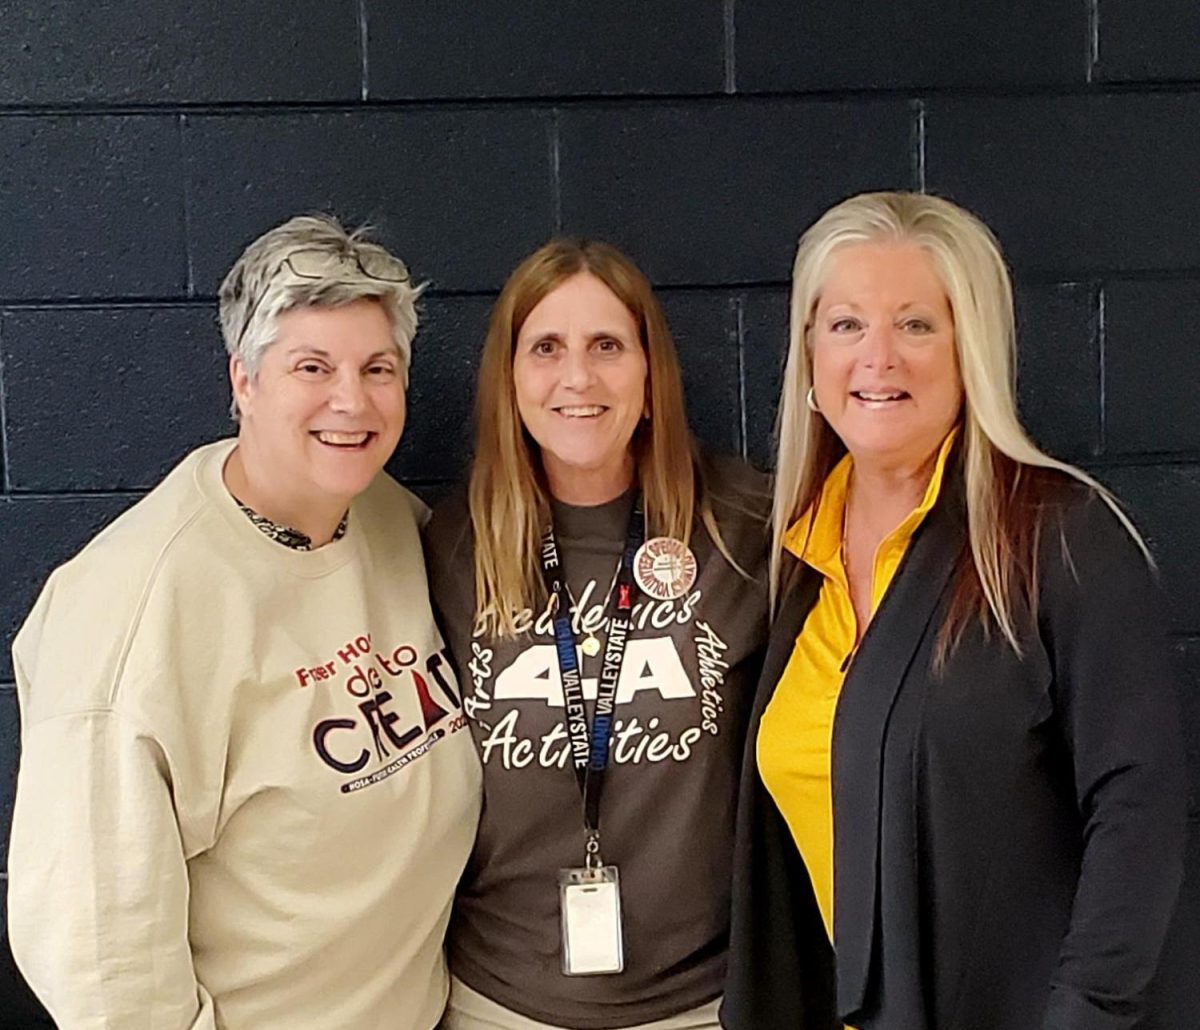 Mrs. Van I, Mrs. Scopas, and Mrs. Hagerty all pose for a picture in the cafeteria.
